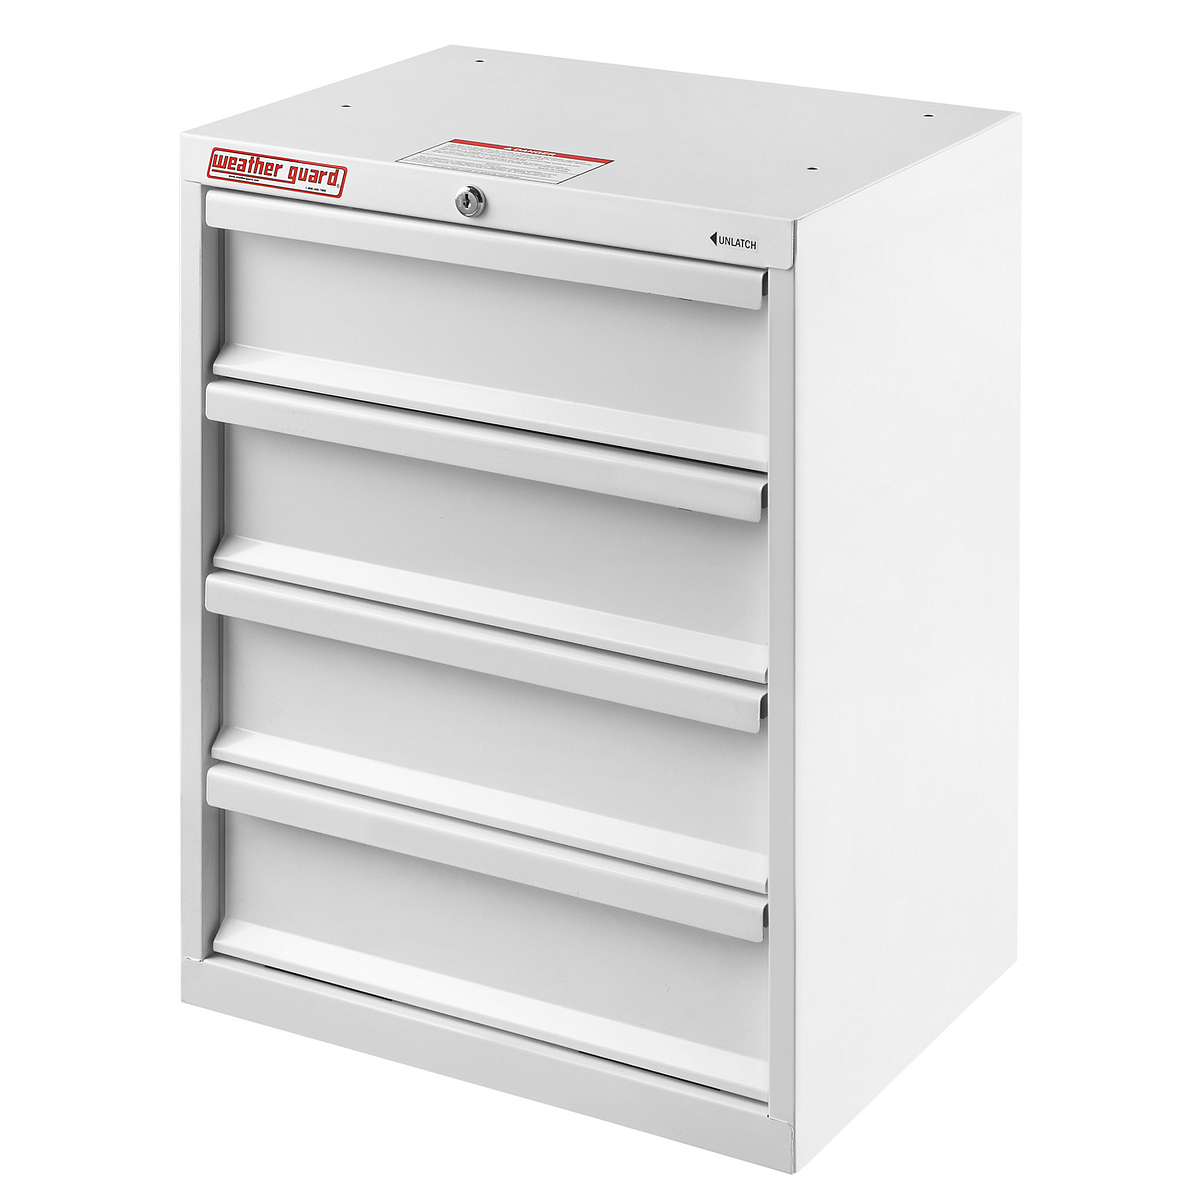 4 Drawer Cabinet 18 in L x 14 in W x 24 in H Image